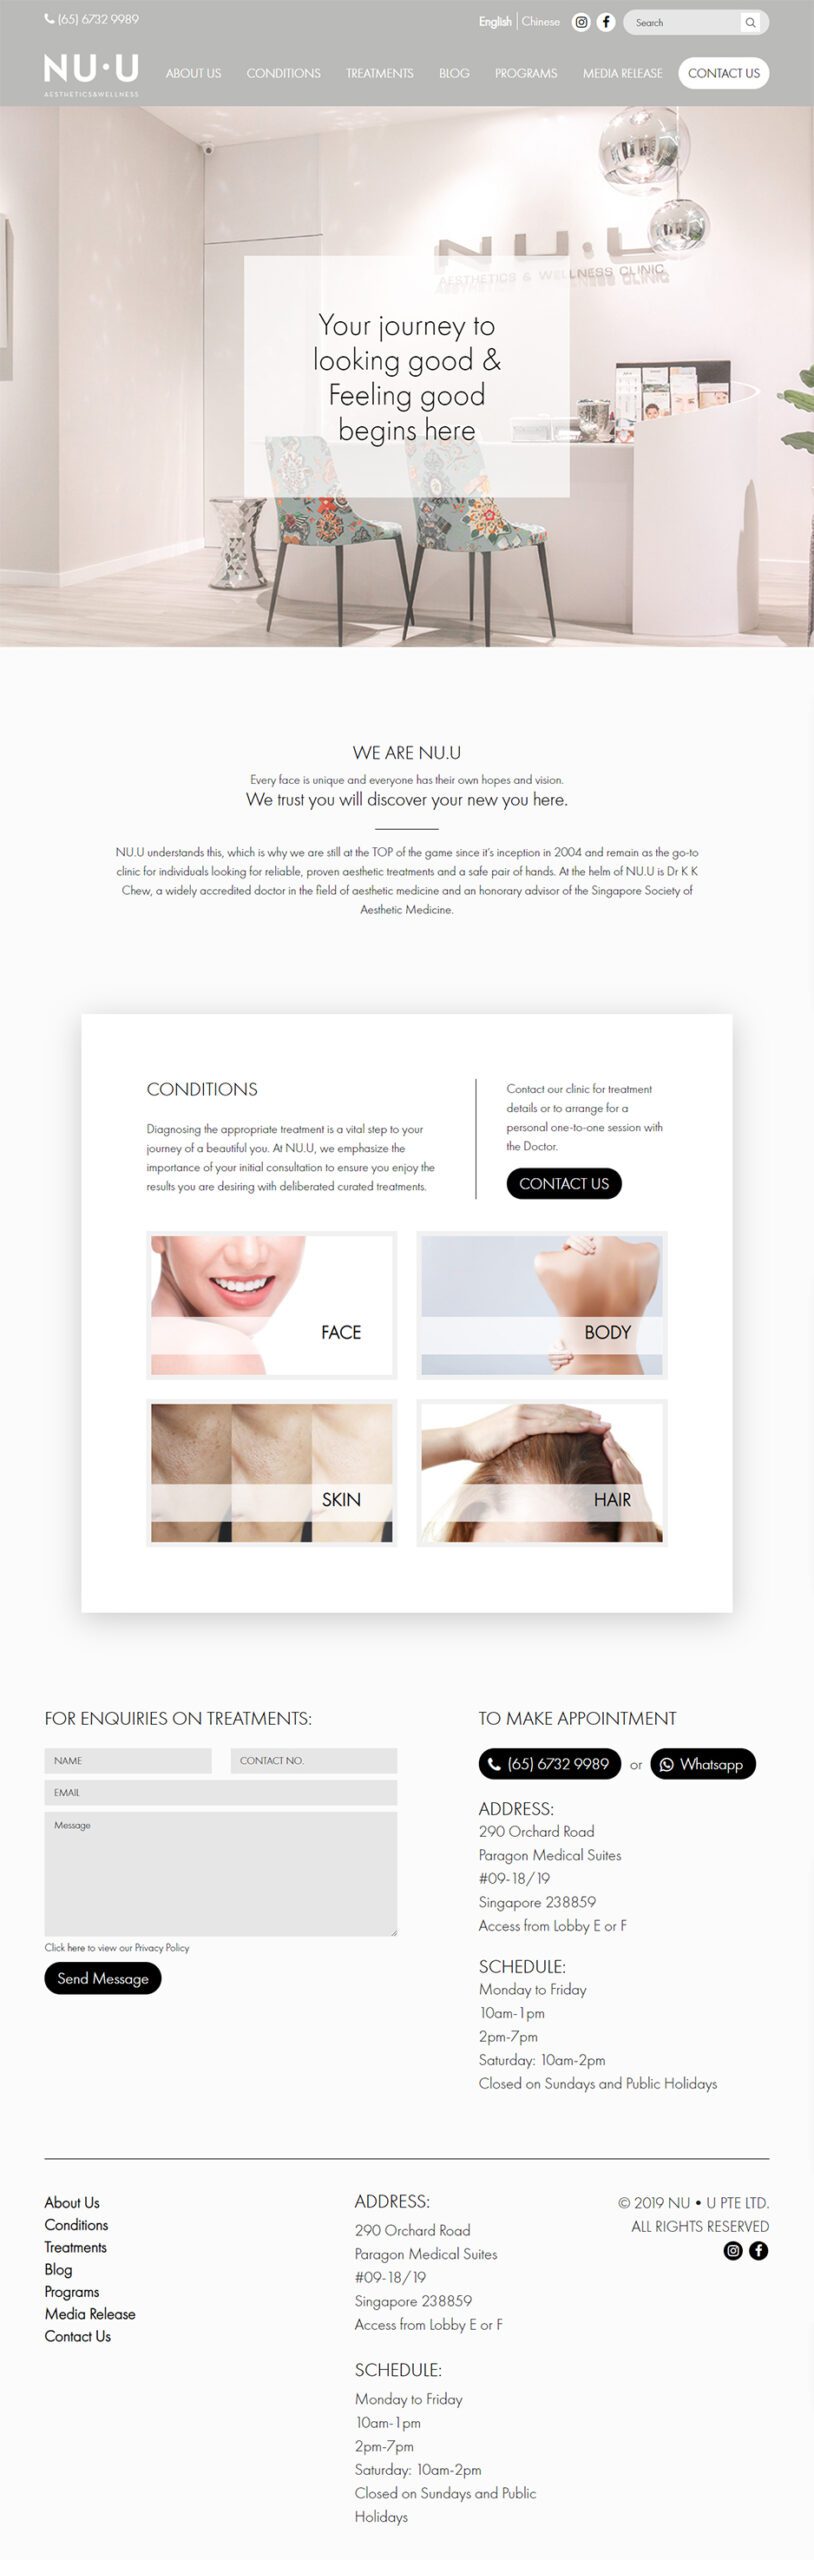 Cosmetic clinic treatment webpage